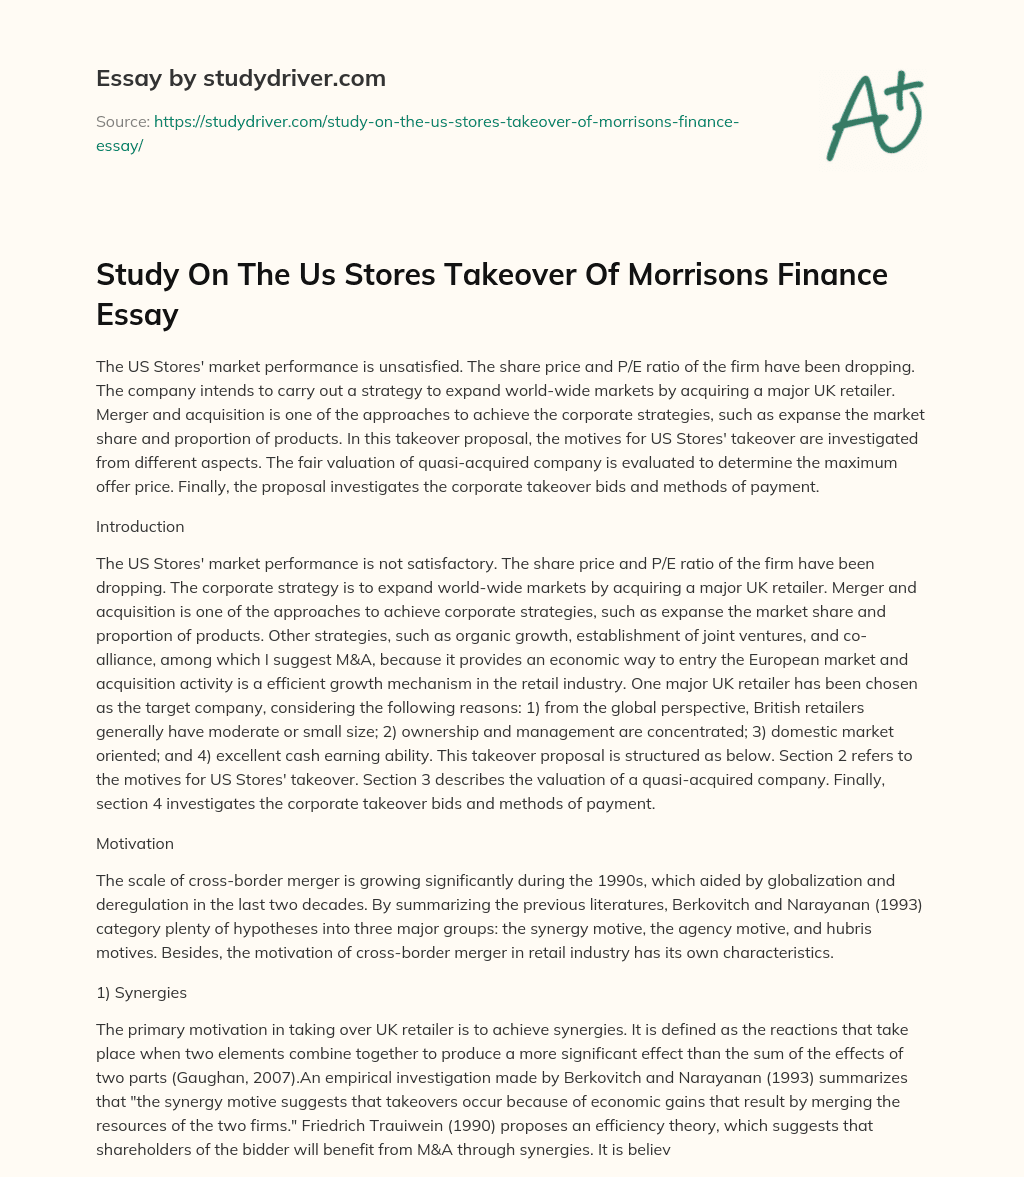 Study on the Us Stores Takeover of Morrisons Finance Essay essay